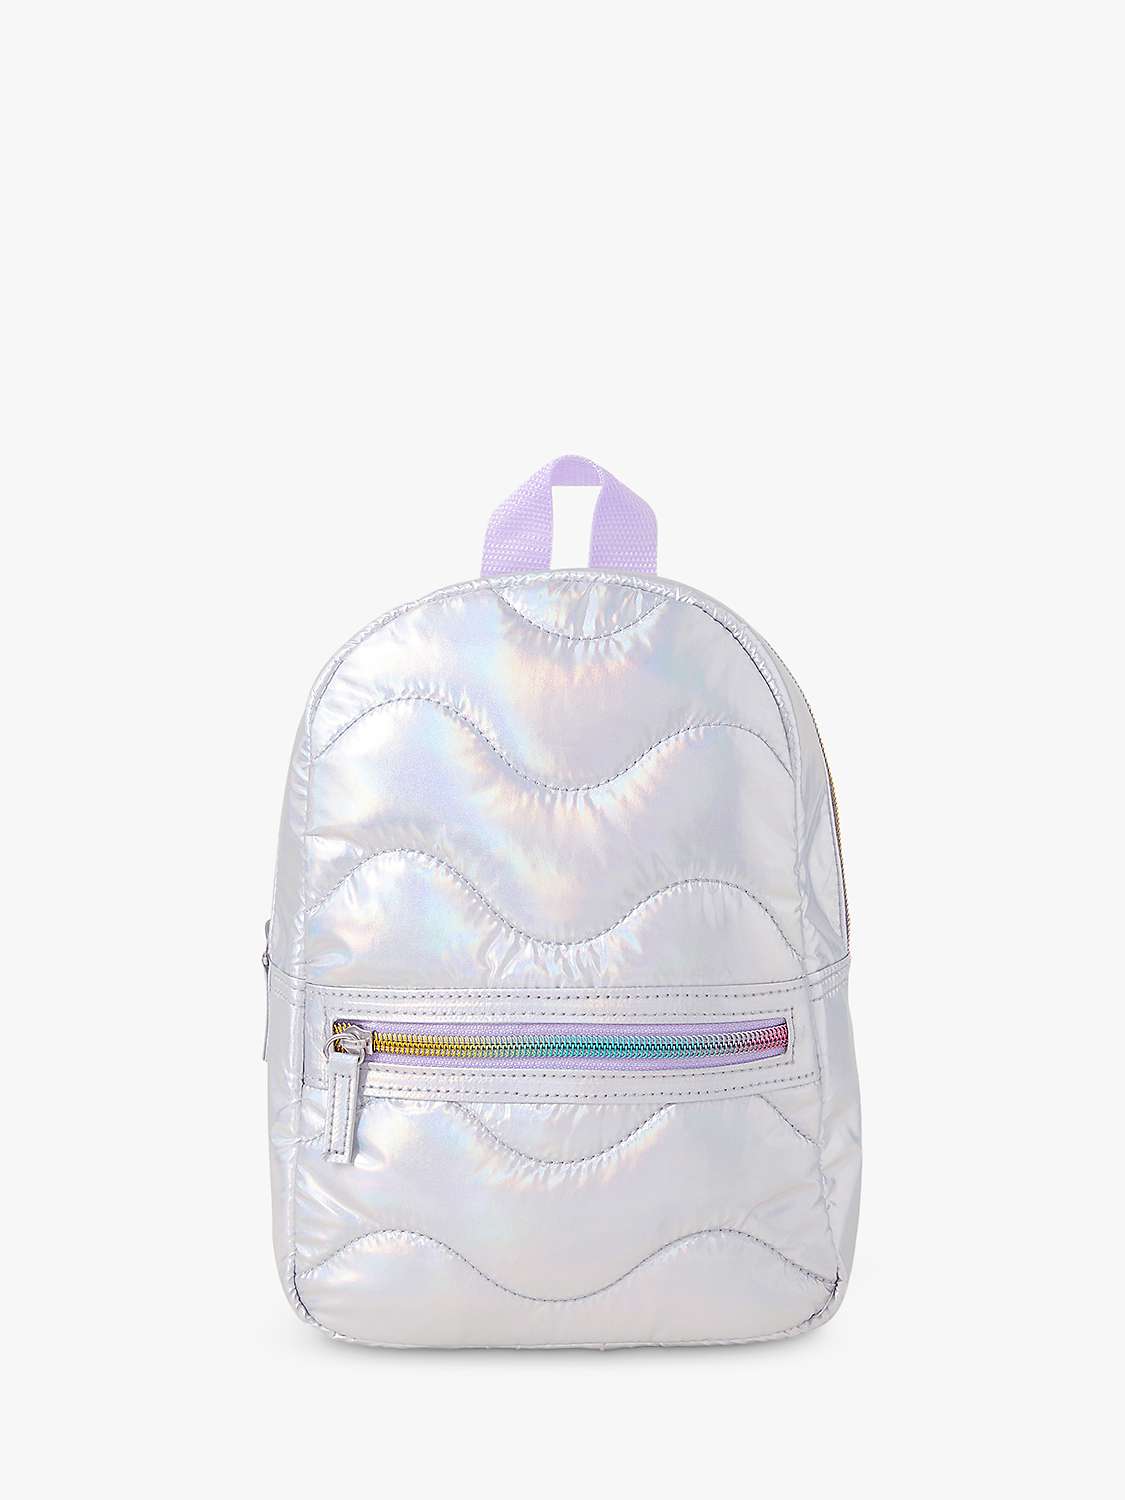 Buy Angels by Accessorize Kids' Iridescent Padded Backpack, Silver Online at johnlewis.com